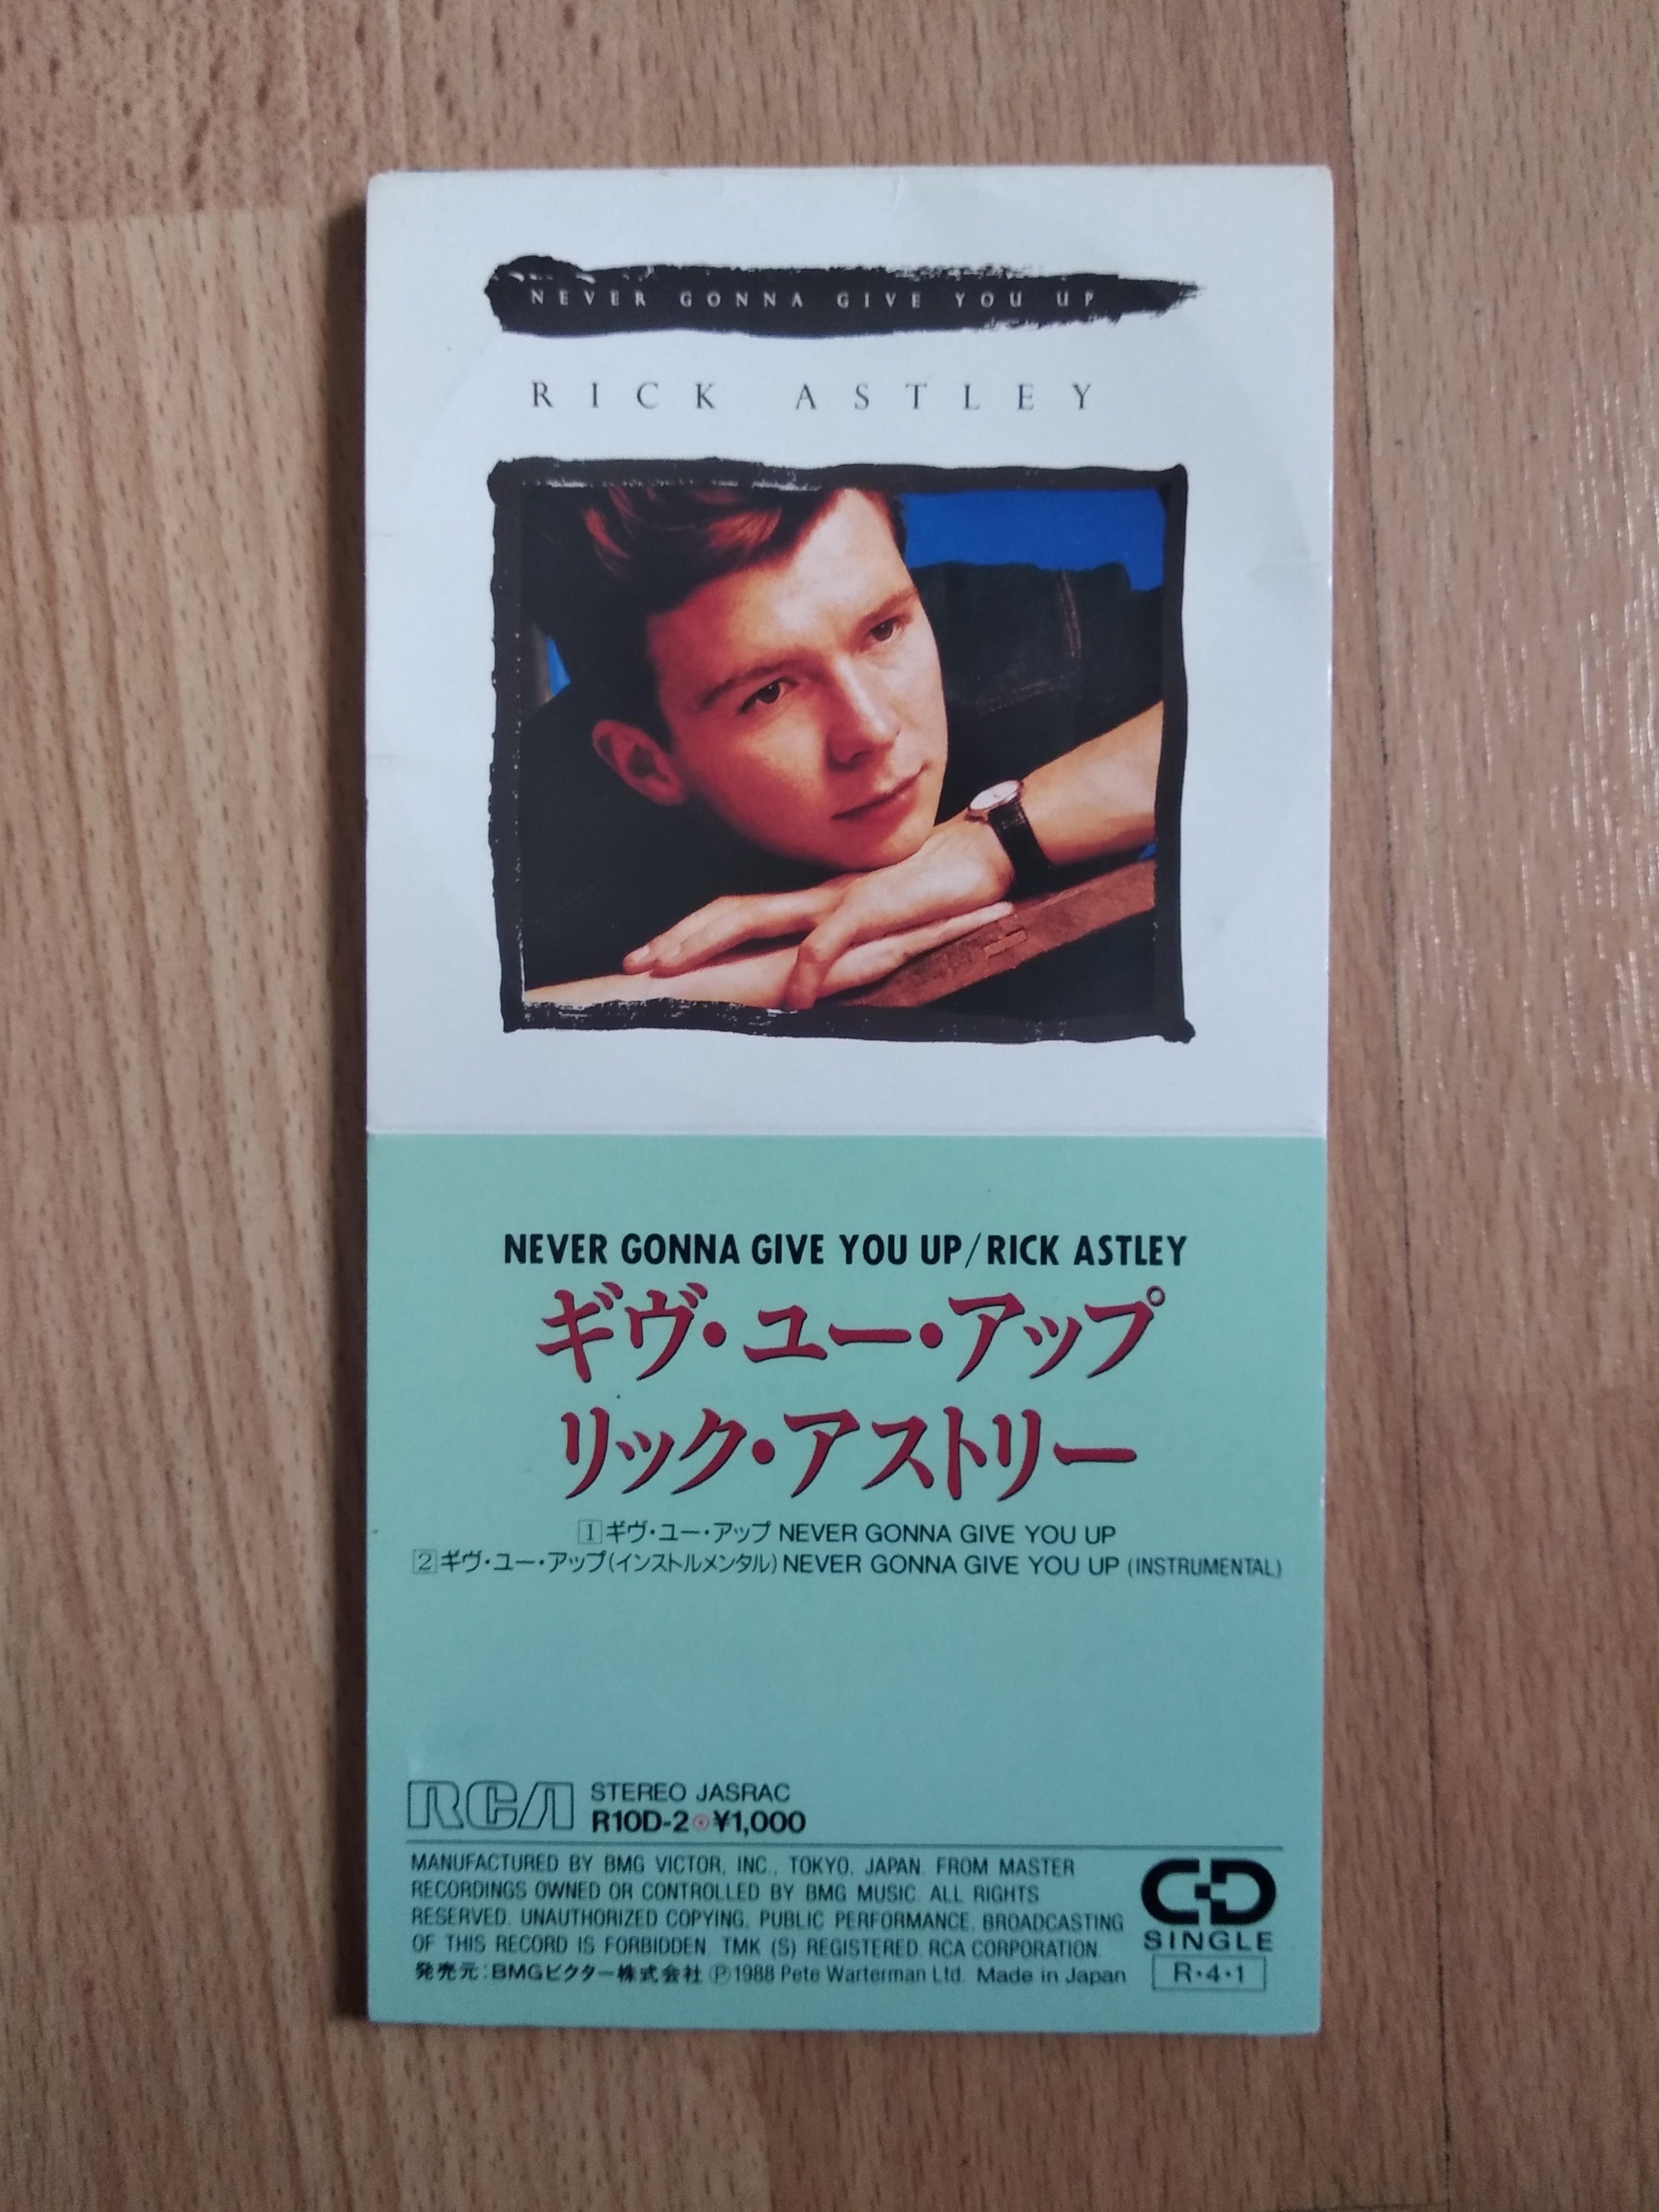 Rick Astley Never Gonna Give You Up Mini Cd Single Japan Hobbies Toys Music Media Cds Dvds On Carousell